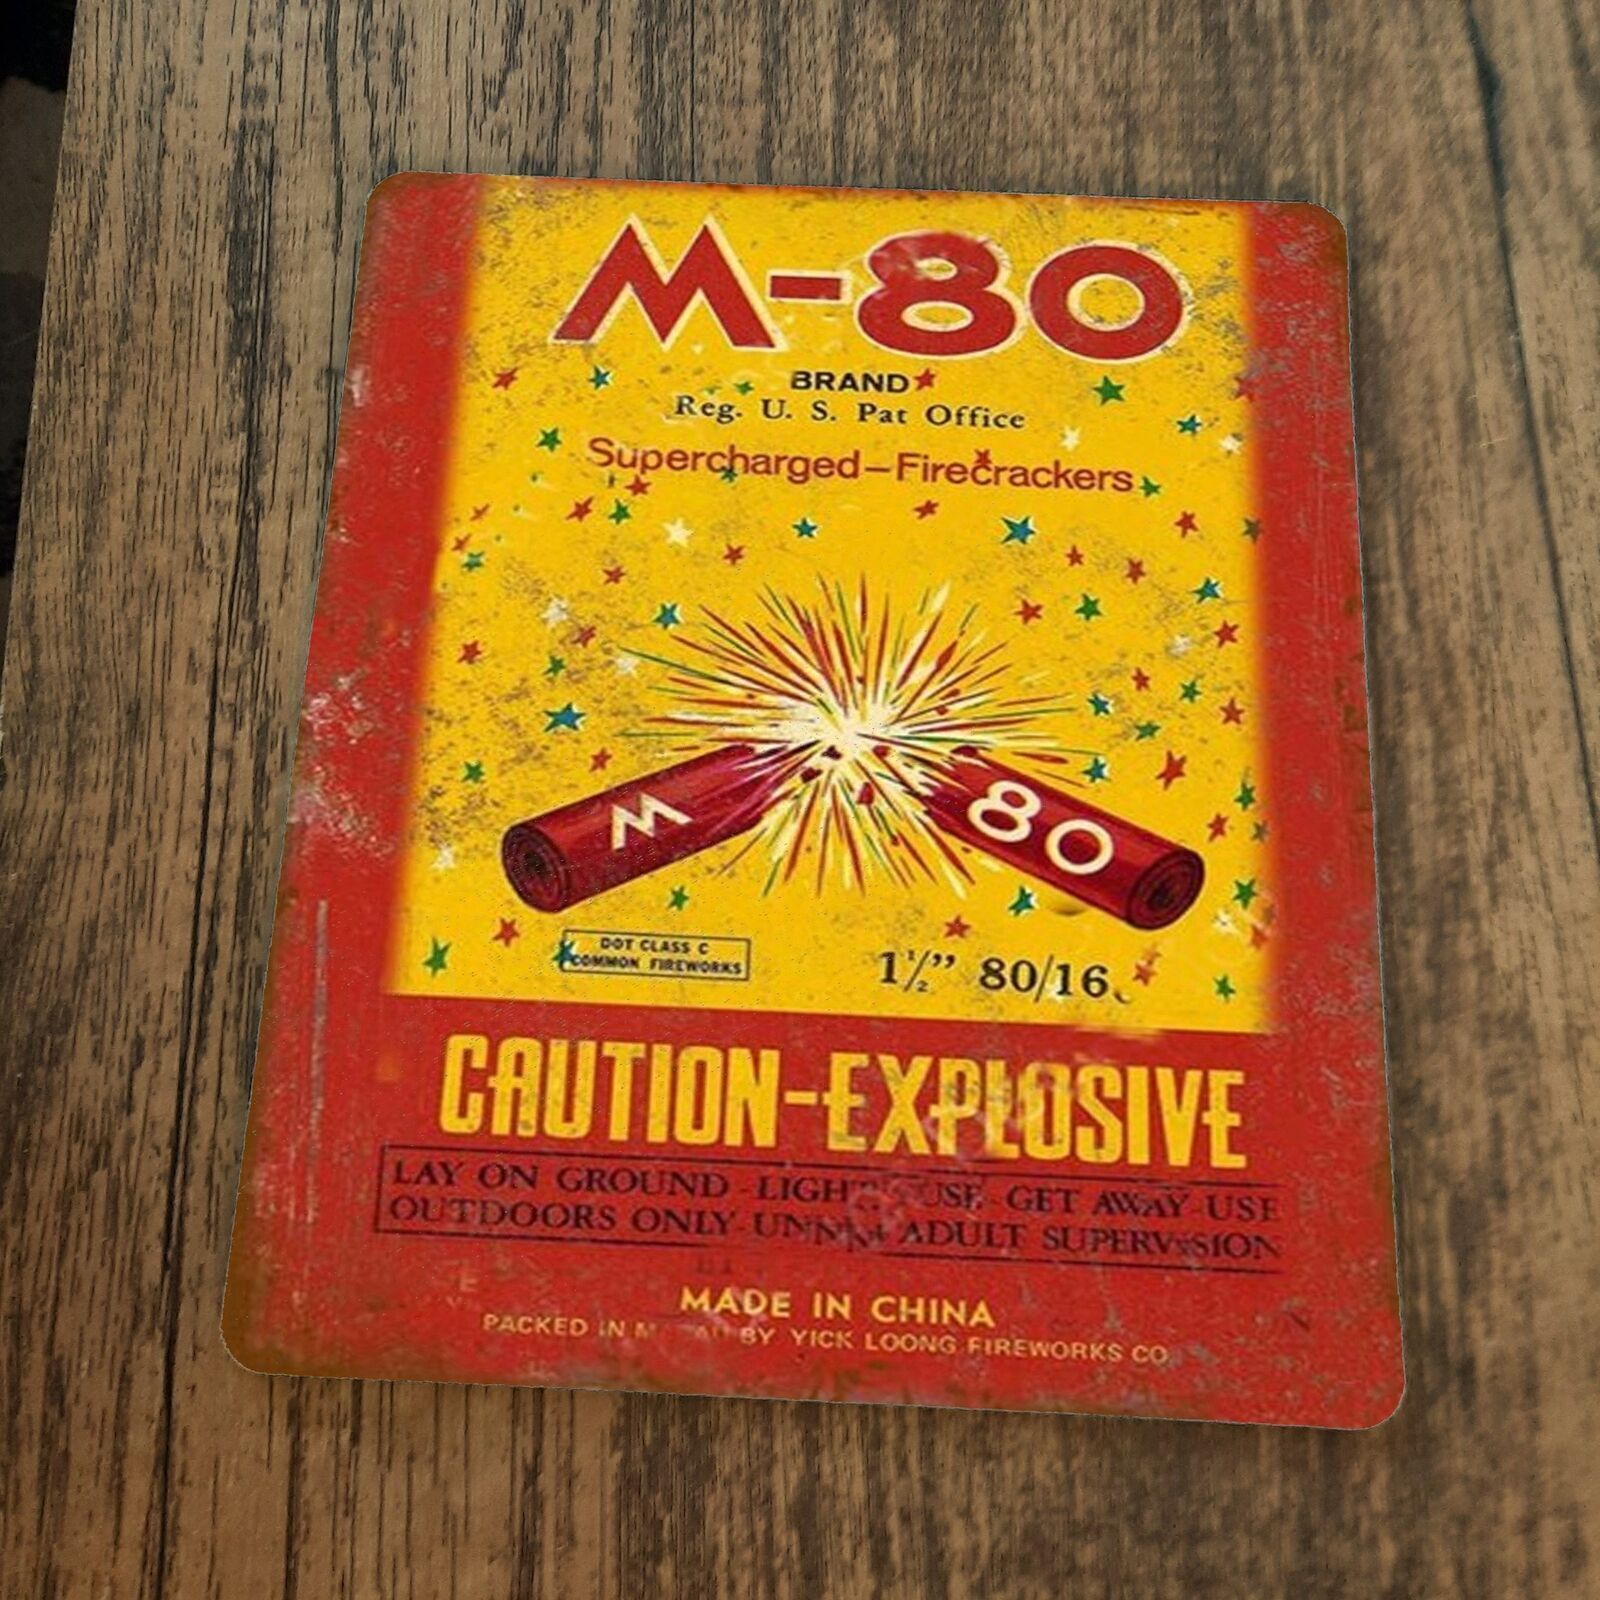 M-80 Vintage Firecracker Ad Mouse Pad